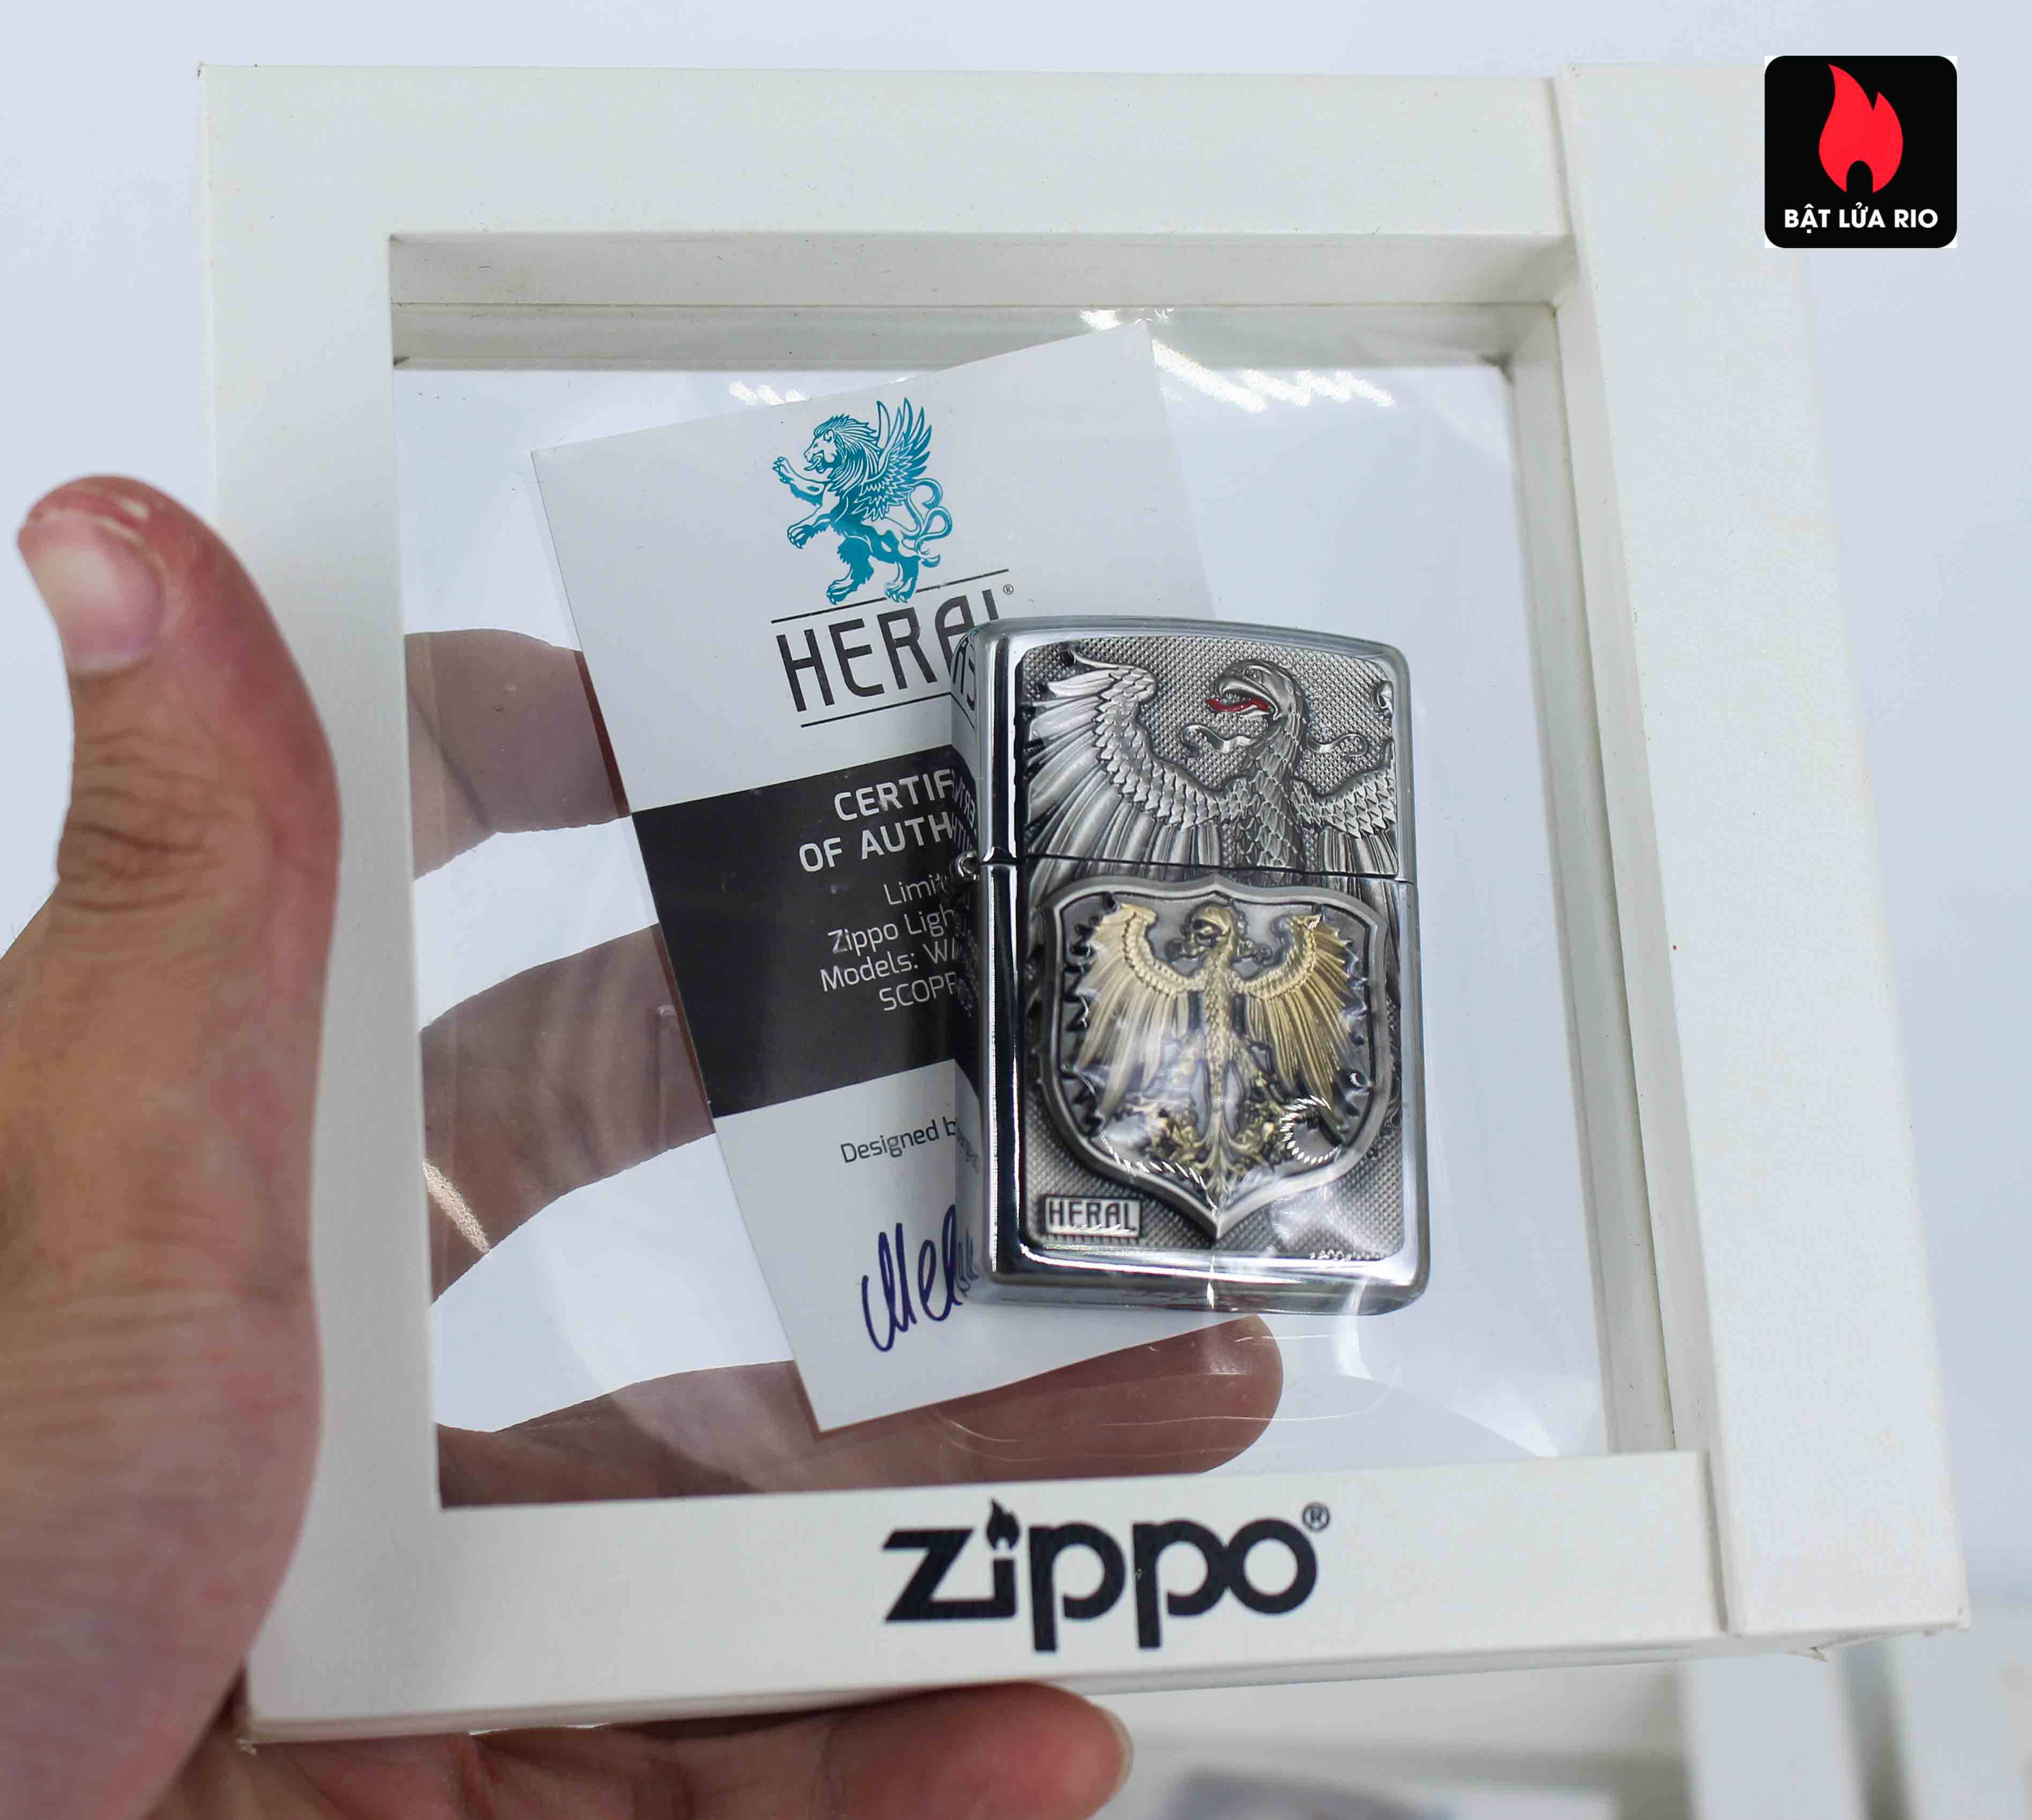 Zippo Set 2014 - Collectible Europe Animal Heral Arco Zippo Lighter Limited Edition 7